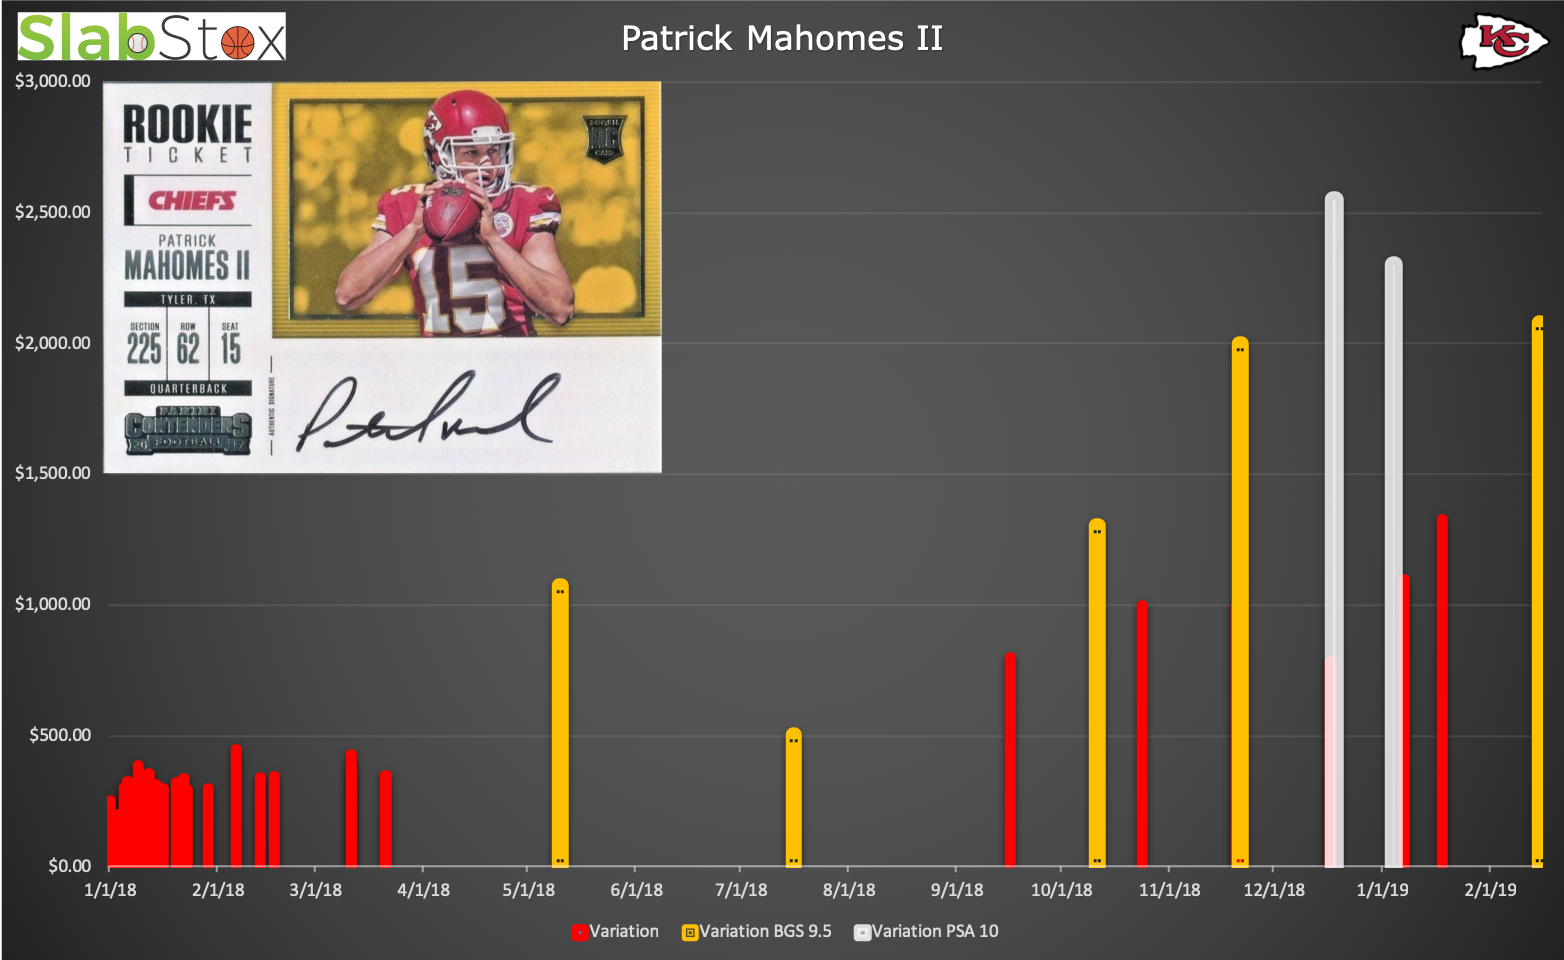 Graph displaying change in value for signed Patrick Mahomes II rookie ticket